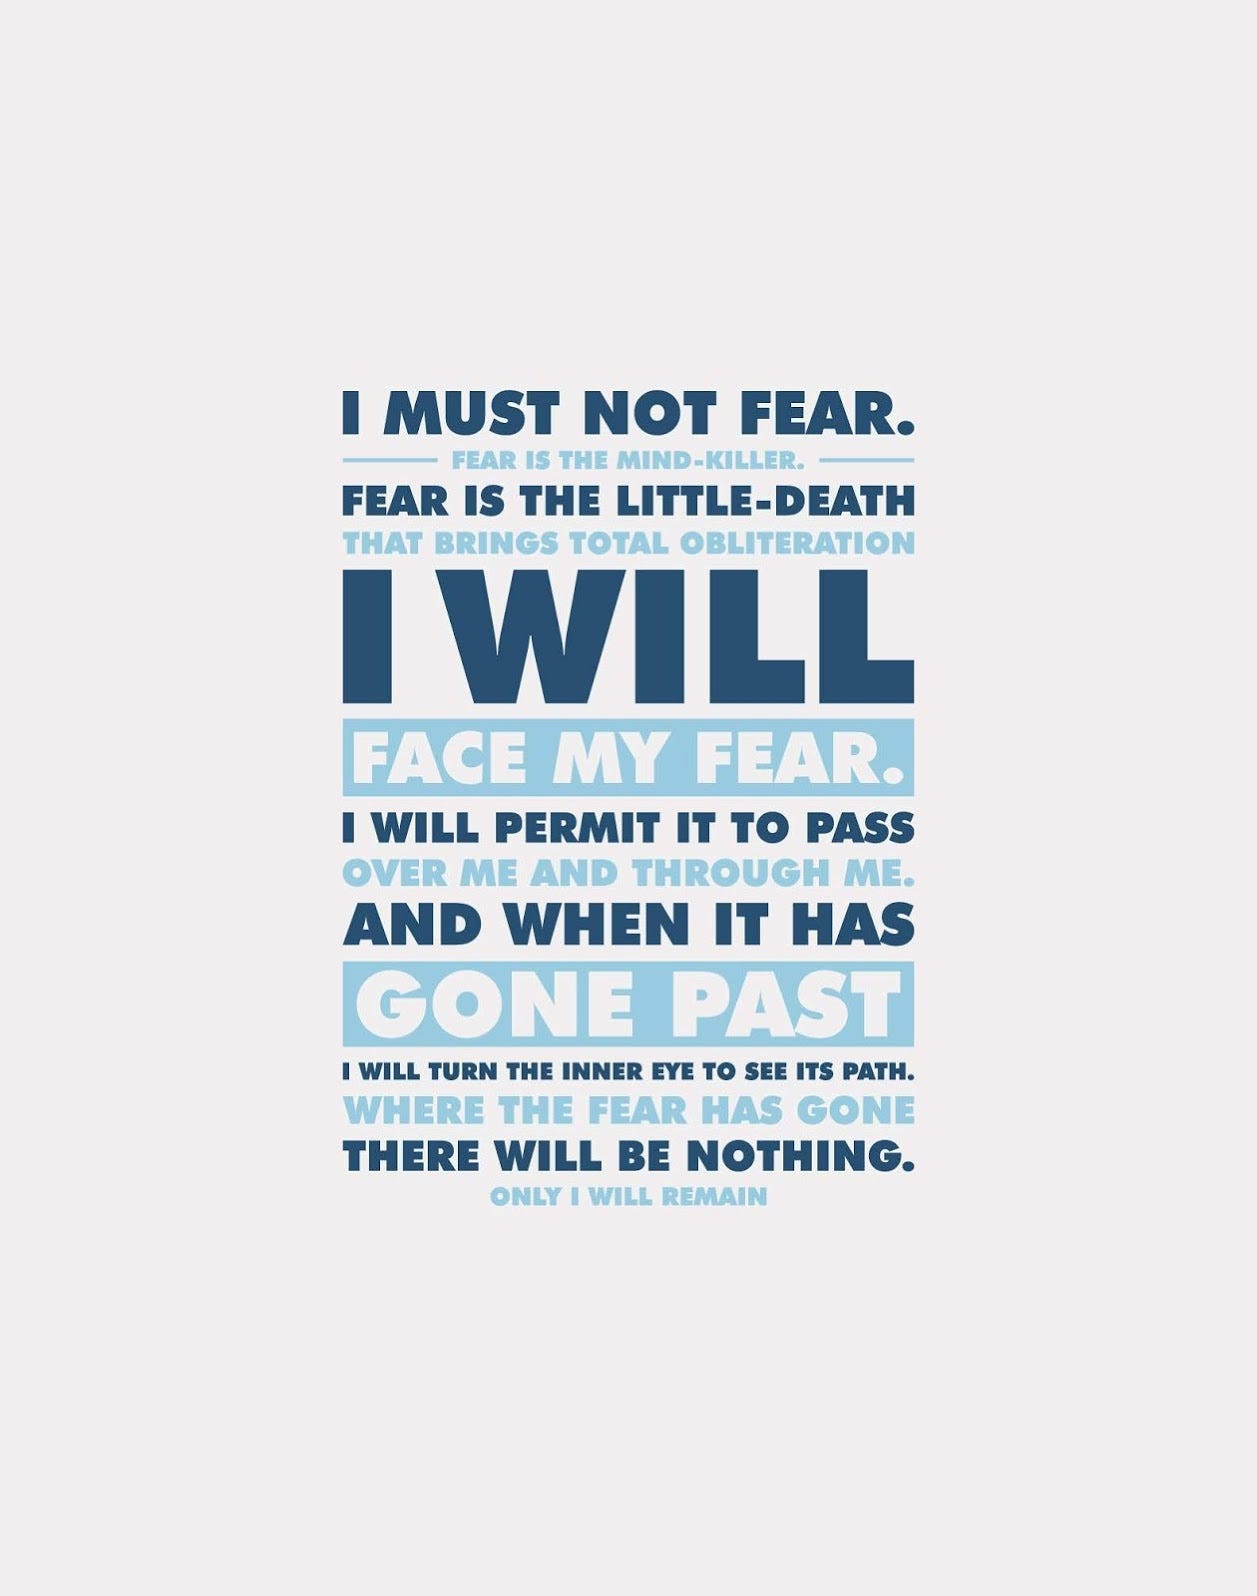 Typographic art of the litany against fear, varying shades of blue text on a light grey background